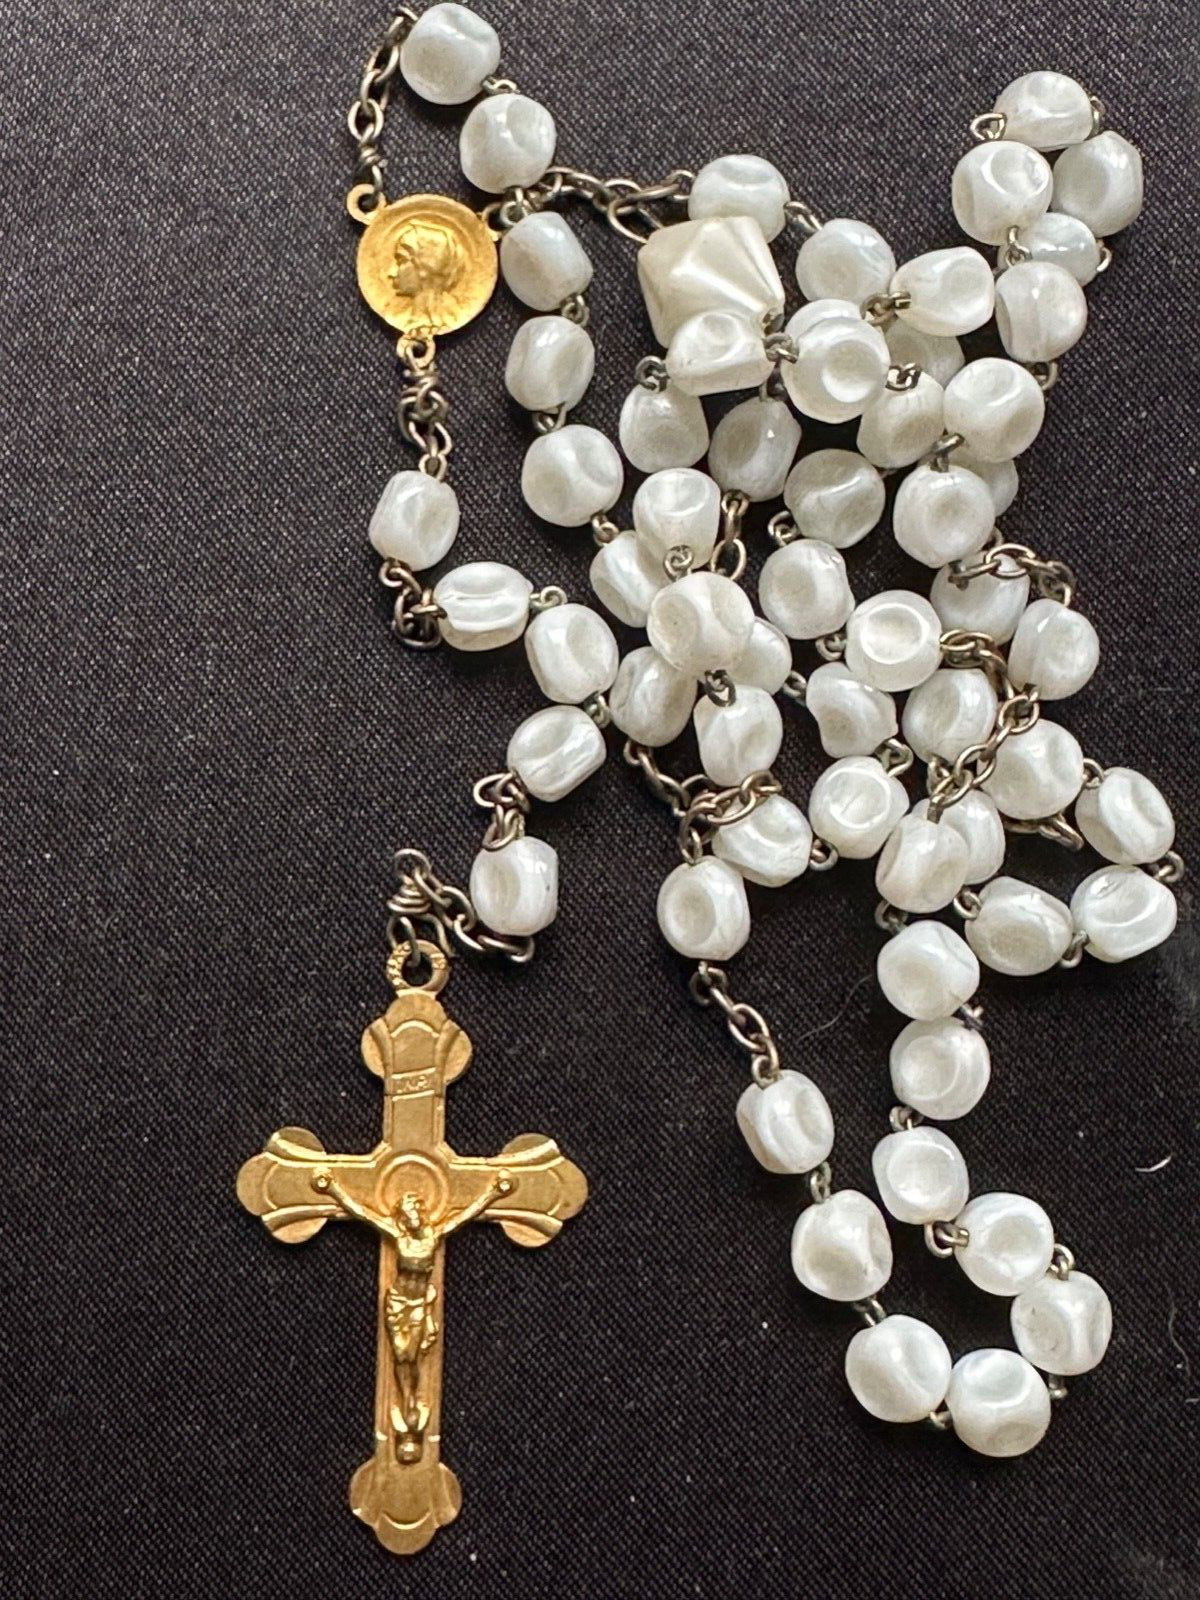 Gorgeous French 1930's Religious Chapelet - Concave White Beads. Gold Cross